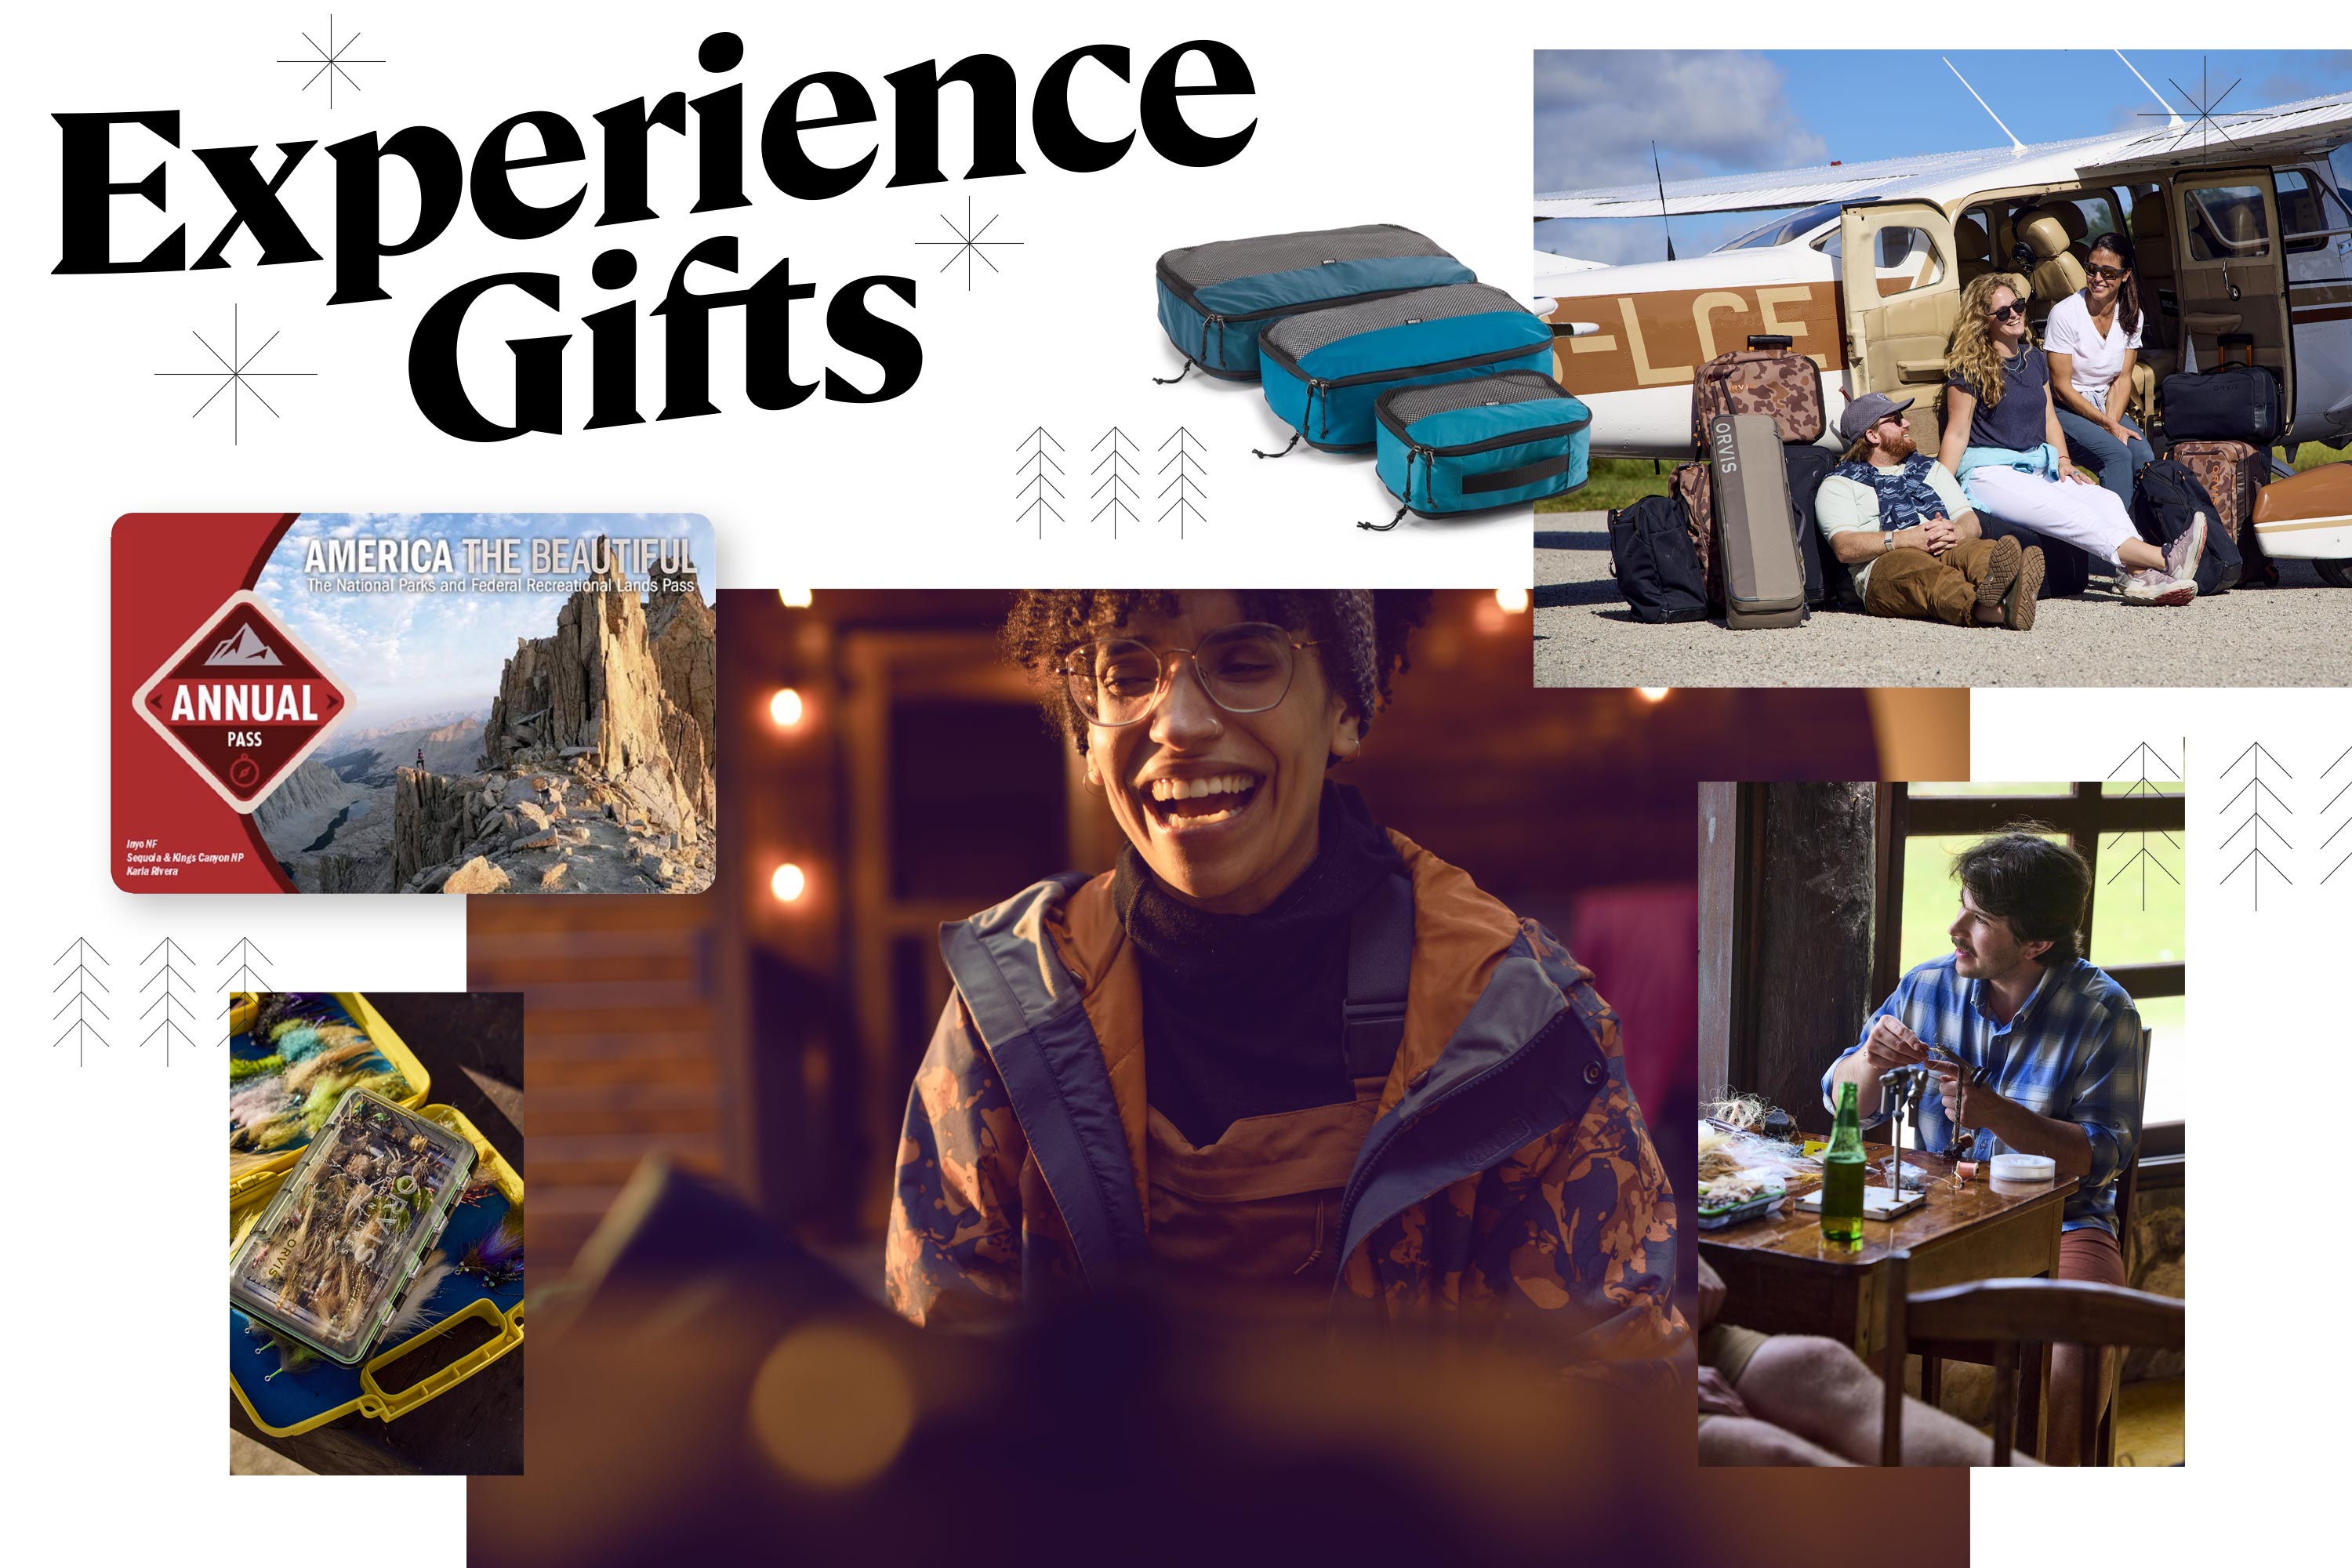 Give Memories, Not Things: These Gifts Are Experiences of a Lifetime